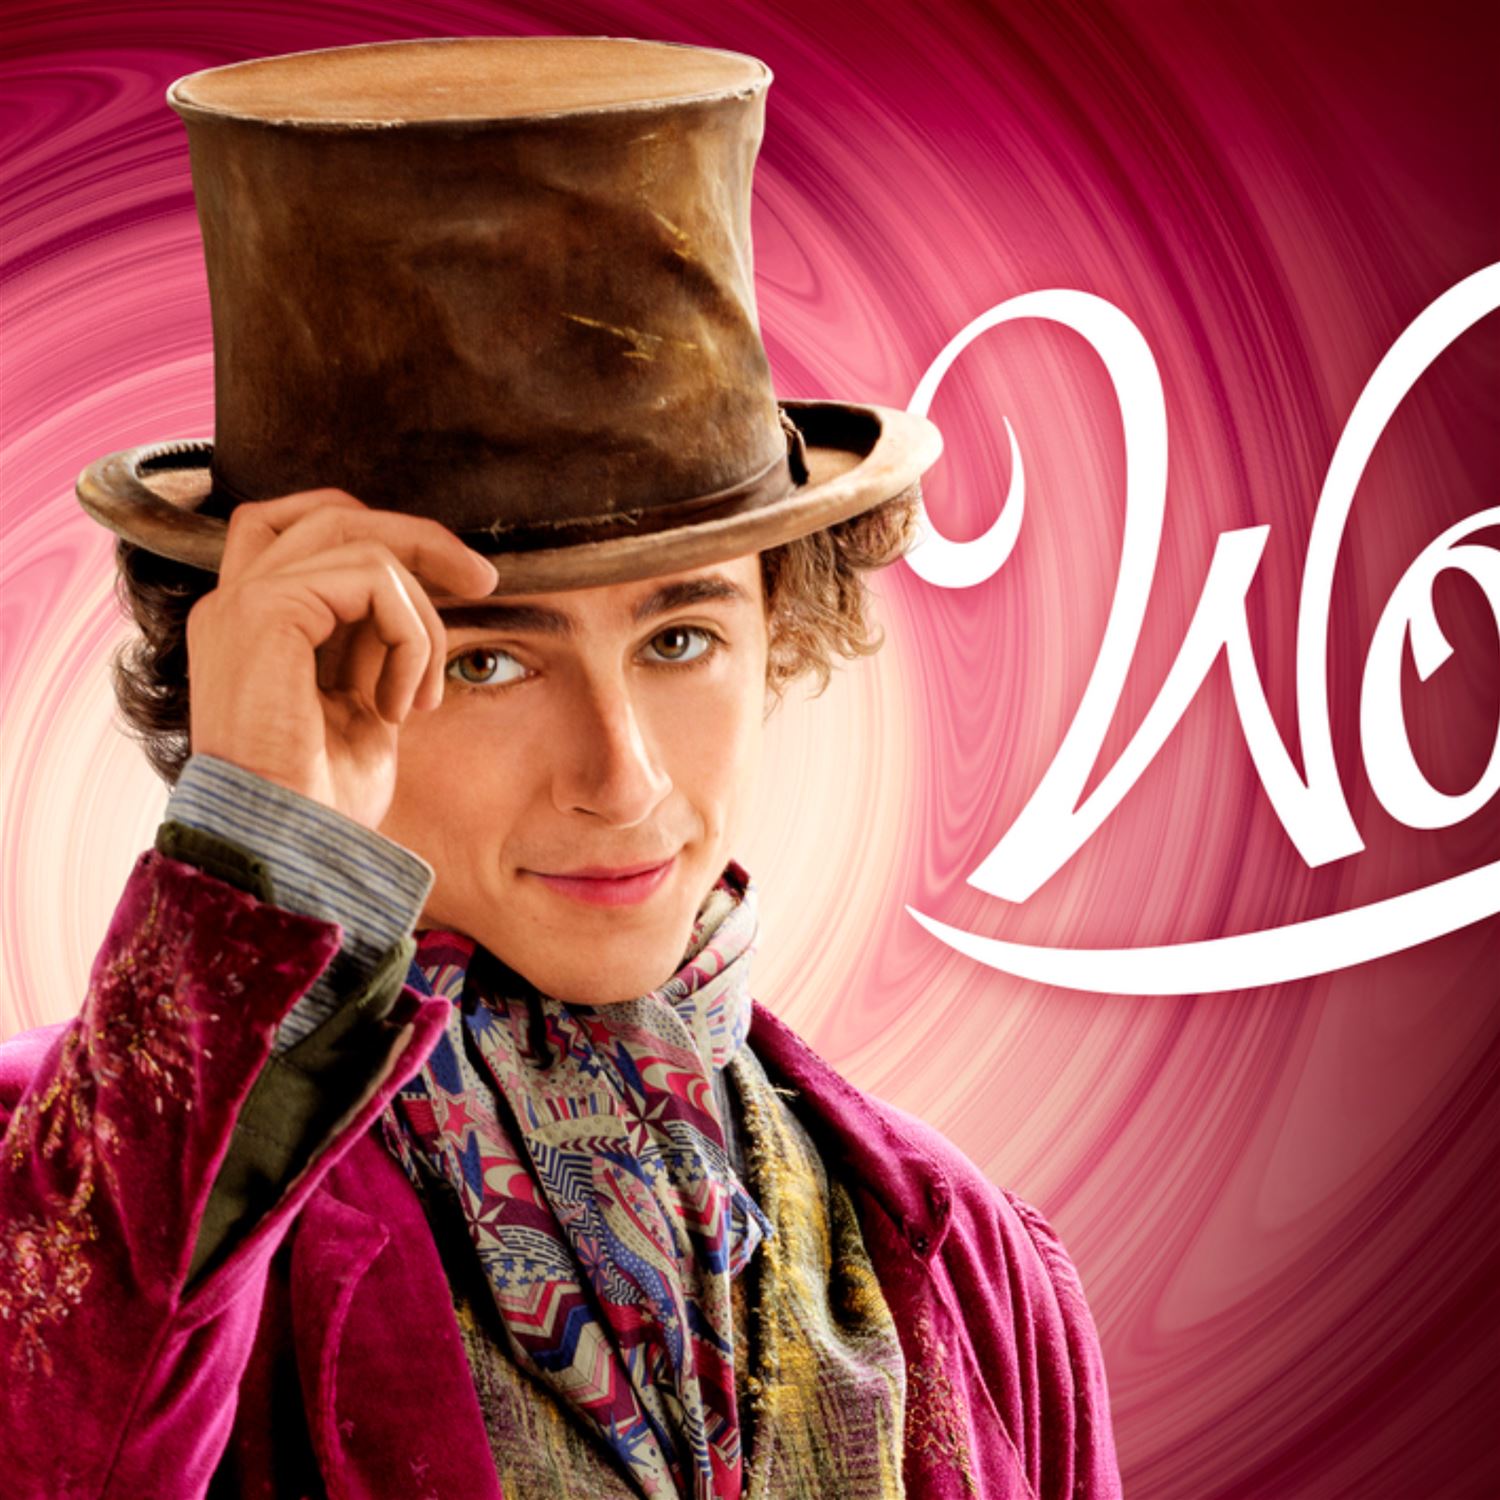 Reviewing the movie 'Wonka' and the importance of positivity